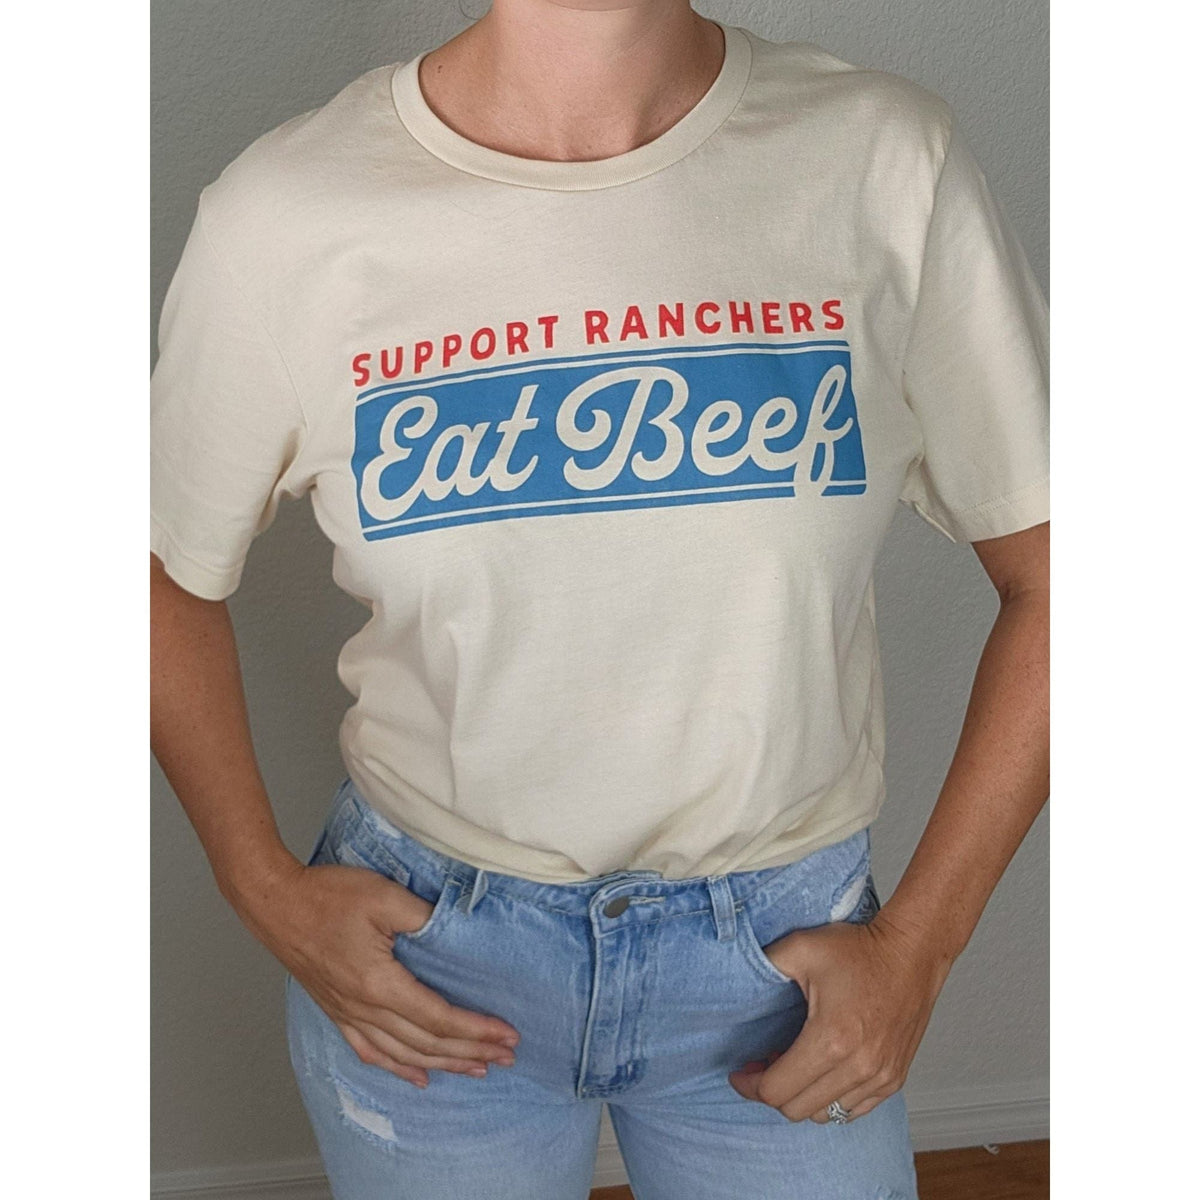 Support Ranchers Eat Beef Tee | Country Graphic Tee | Vintage T-Shirt TheFringeCultureCollective